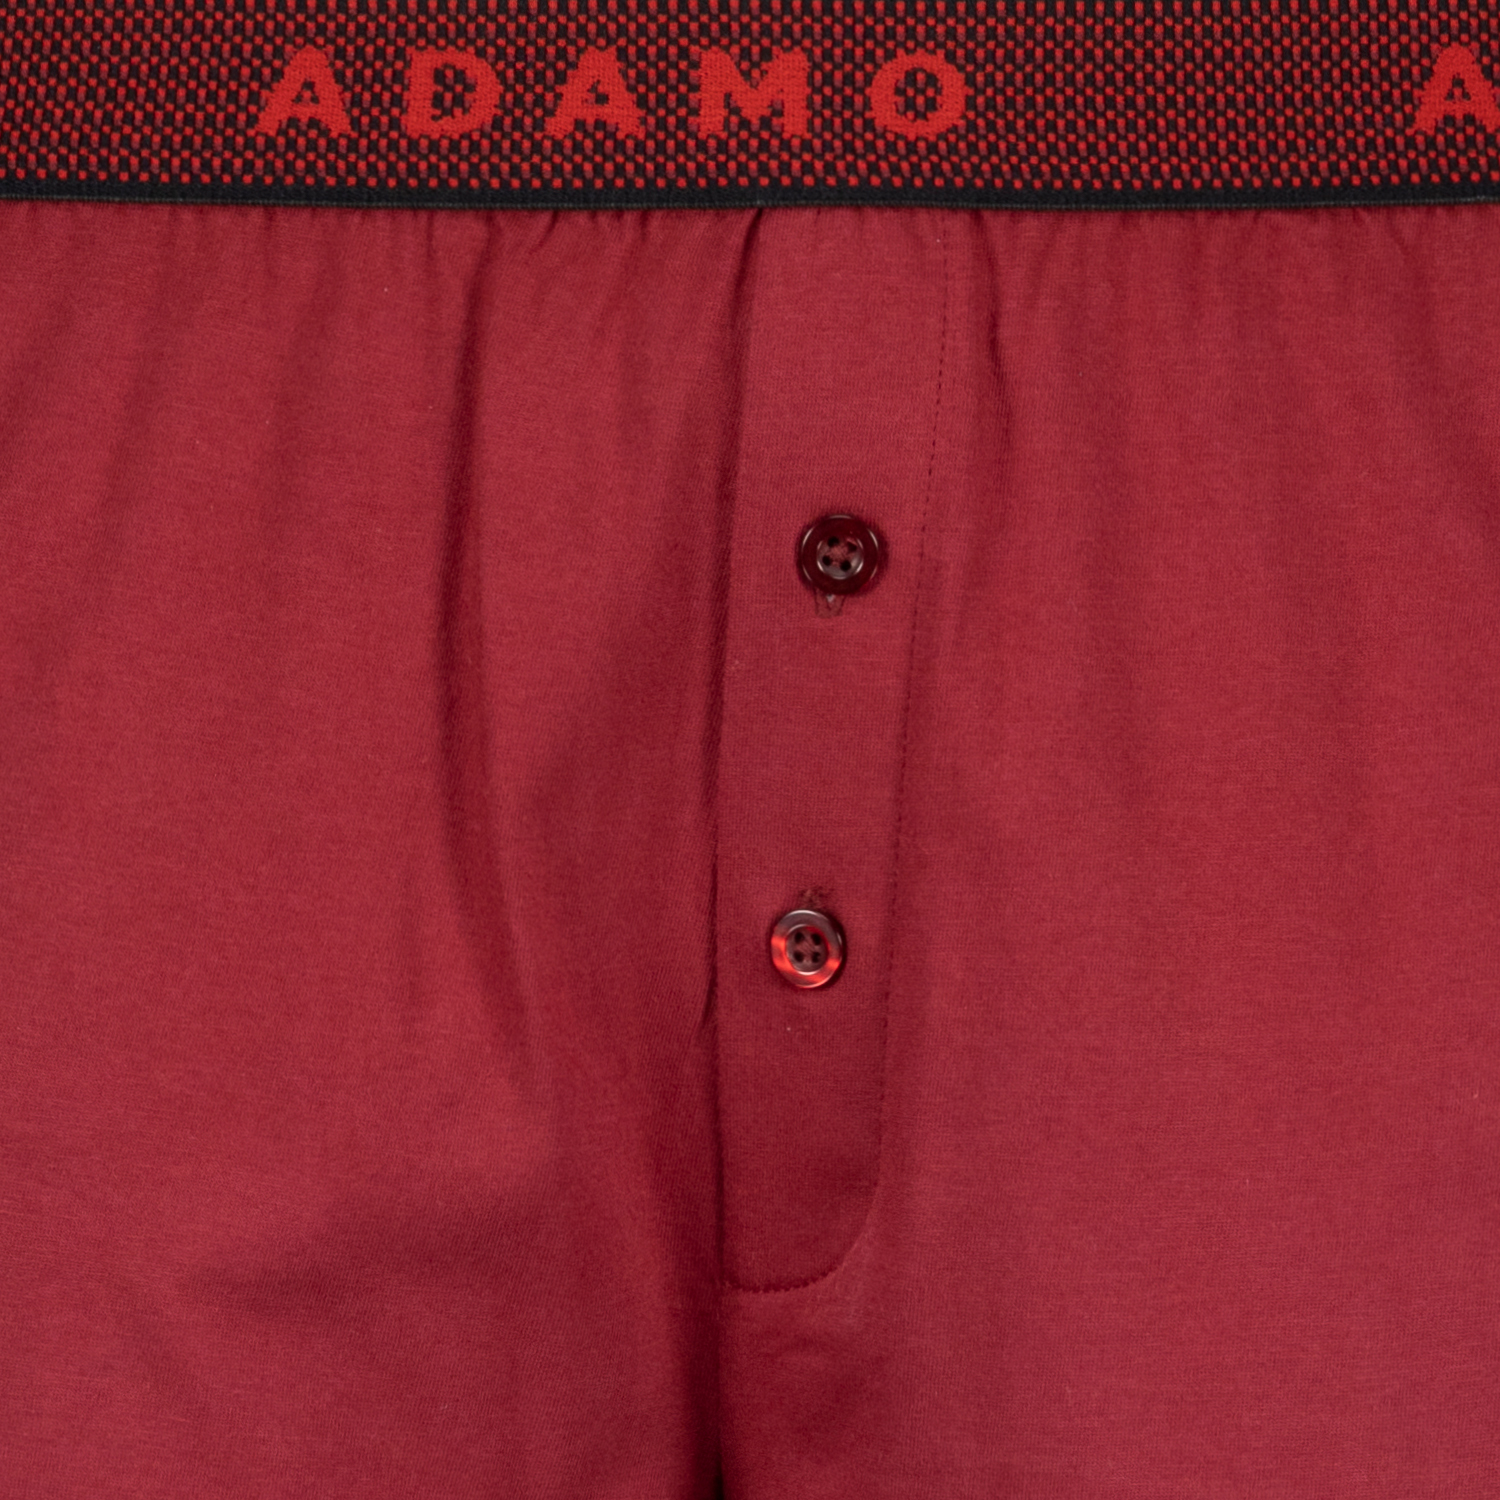 Burgundy boxershorts by ADAMO series "Jonas" in oversizes up to 20 // double pack